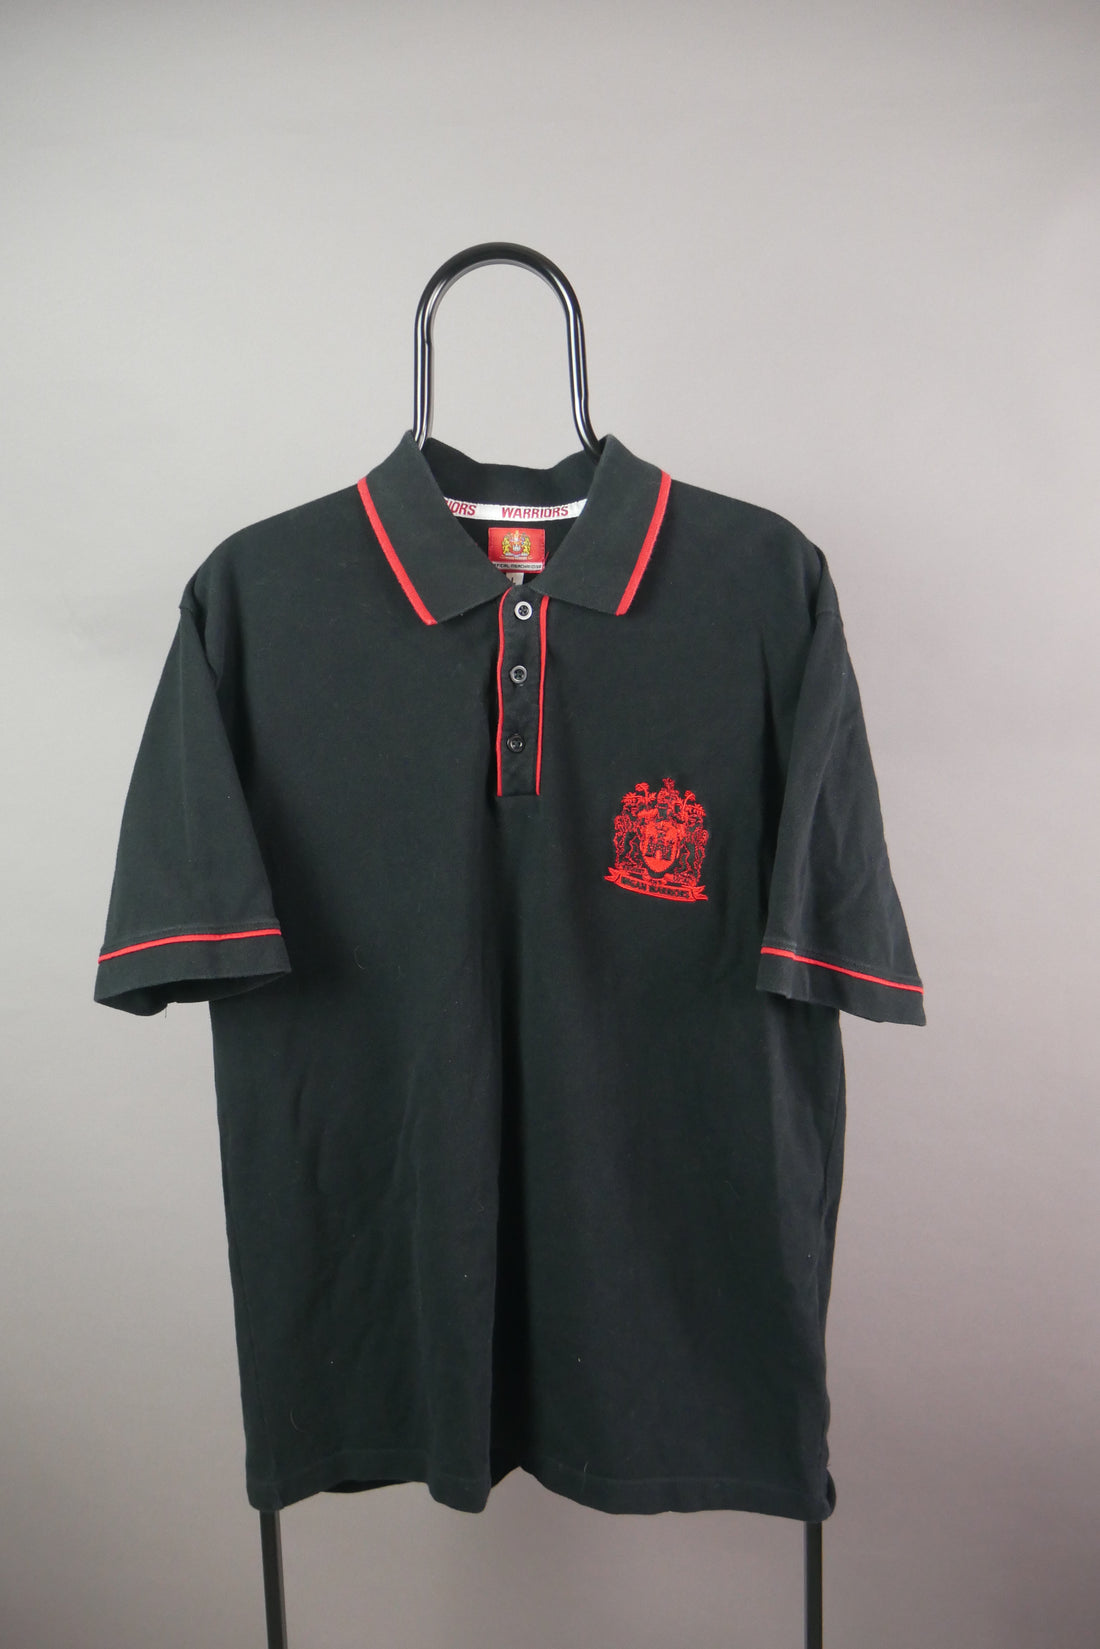 The Wigan Warriors Polo (L)